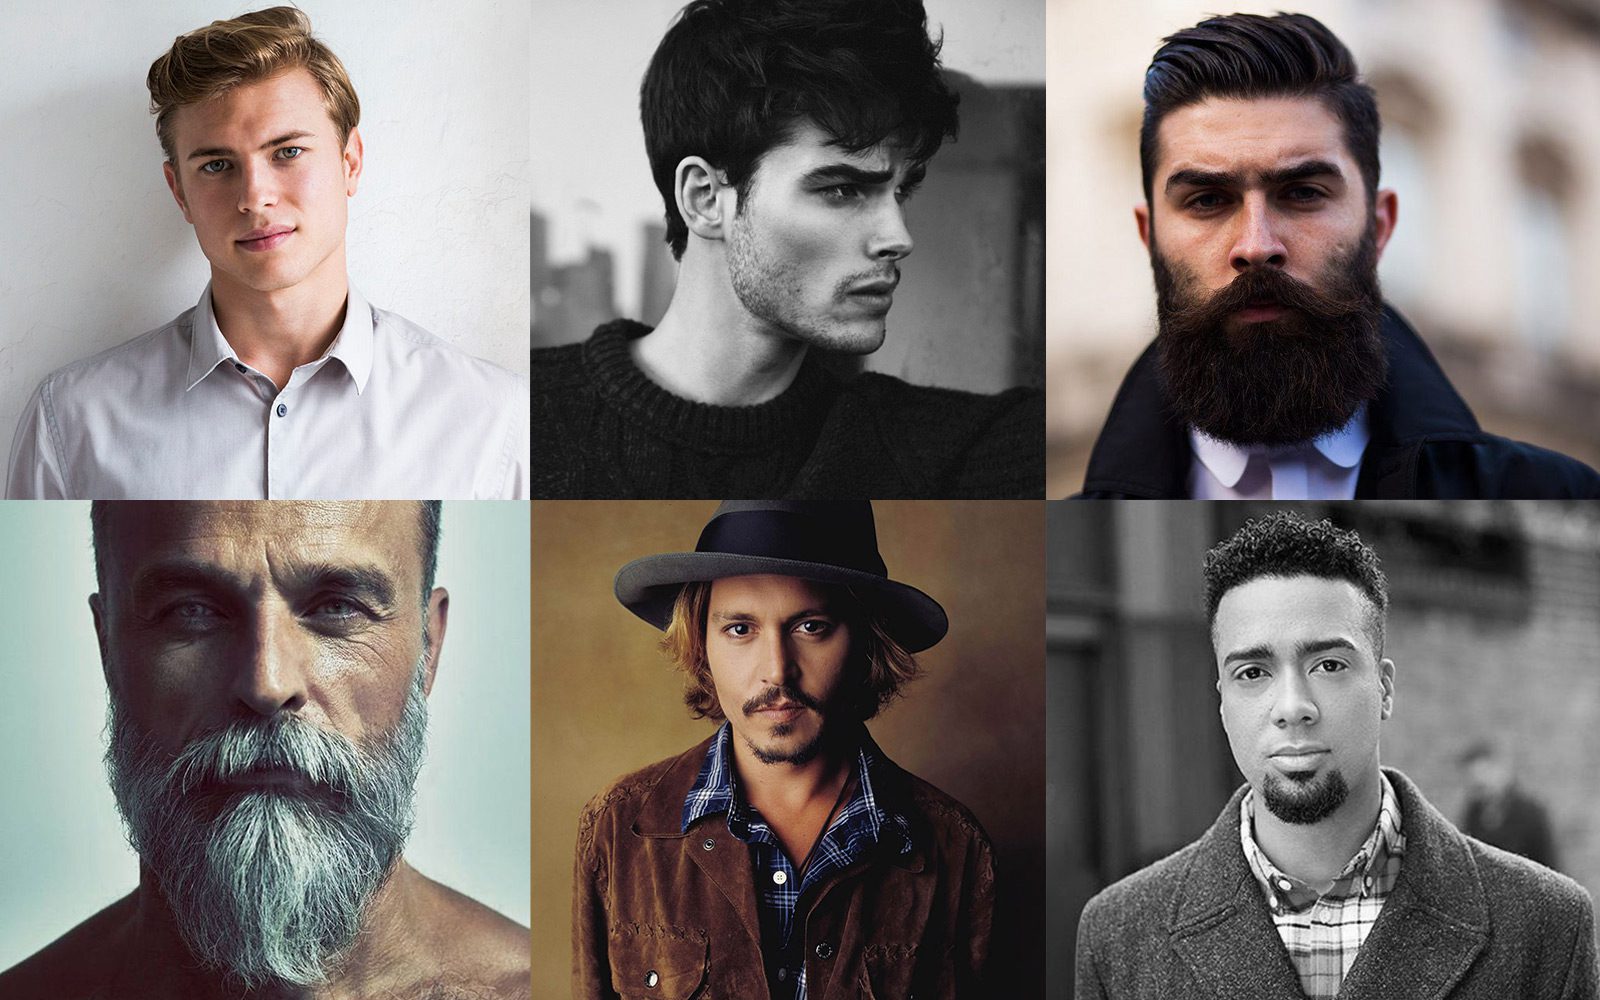 The Ultimate Guide to Facial Hair Styles - Best & Worst Beard